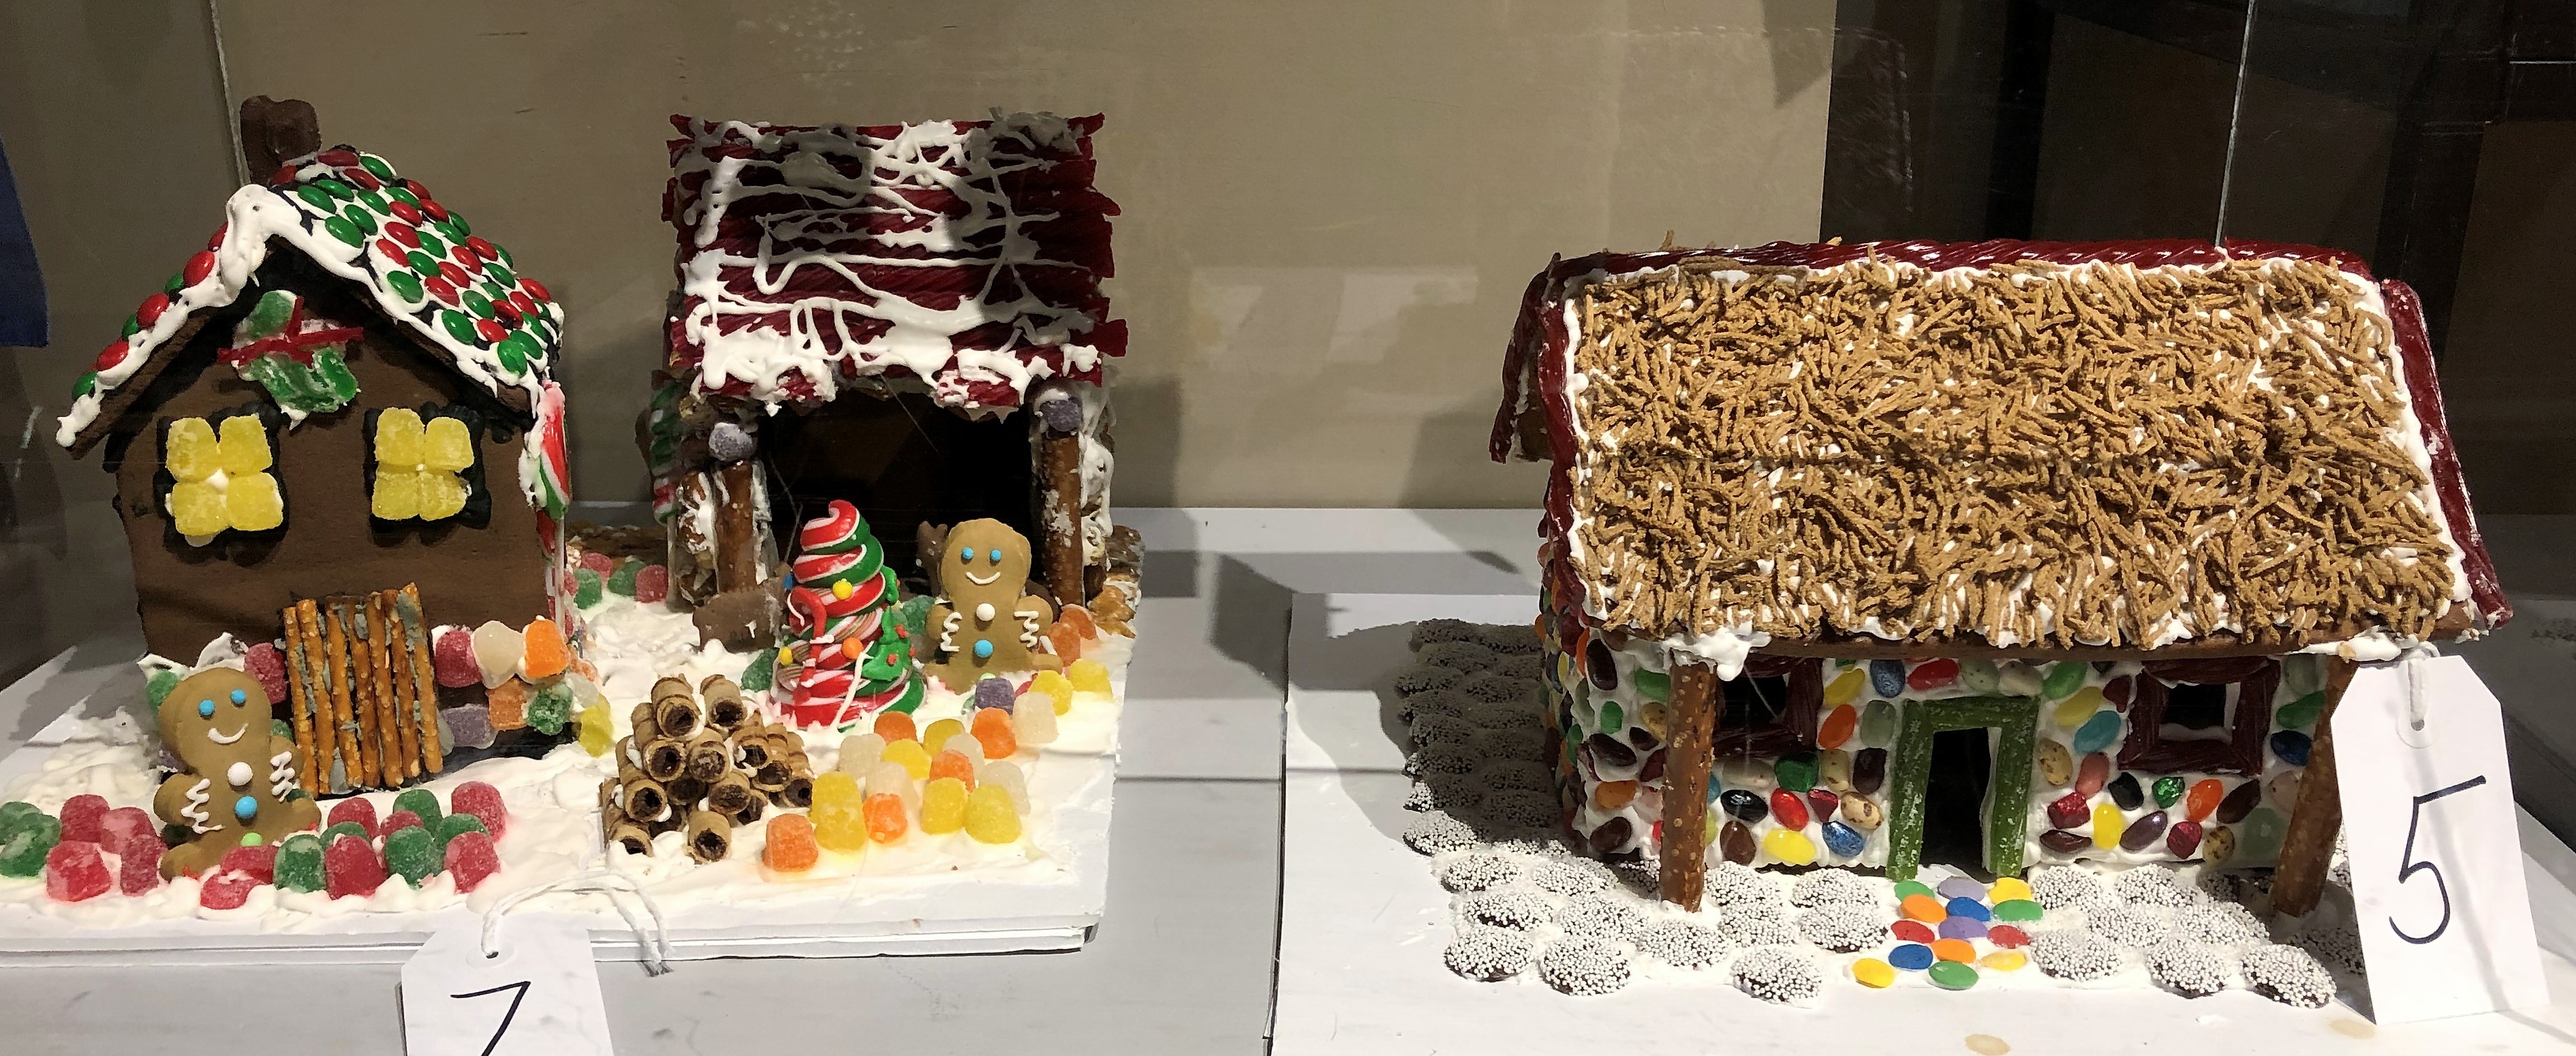 Small gingerbread cottage and gingerbread barn with yellow, red, and green candy gumdrops and gingerbread people in the front yard.